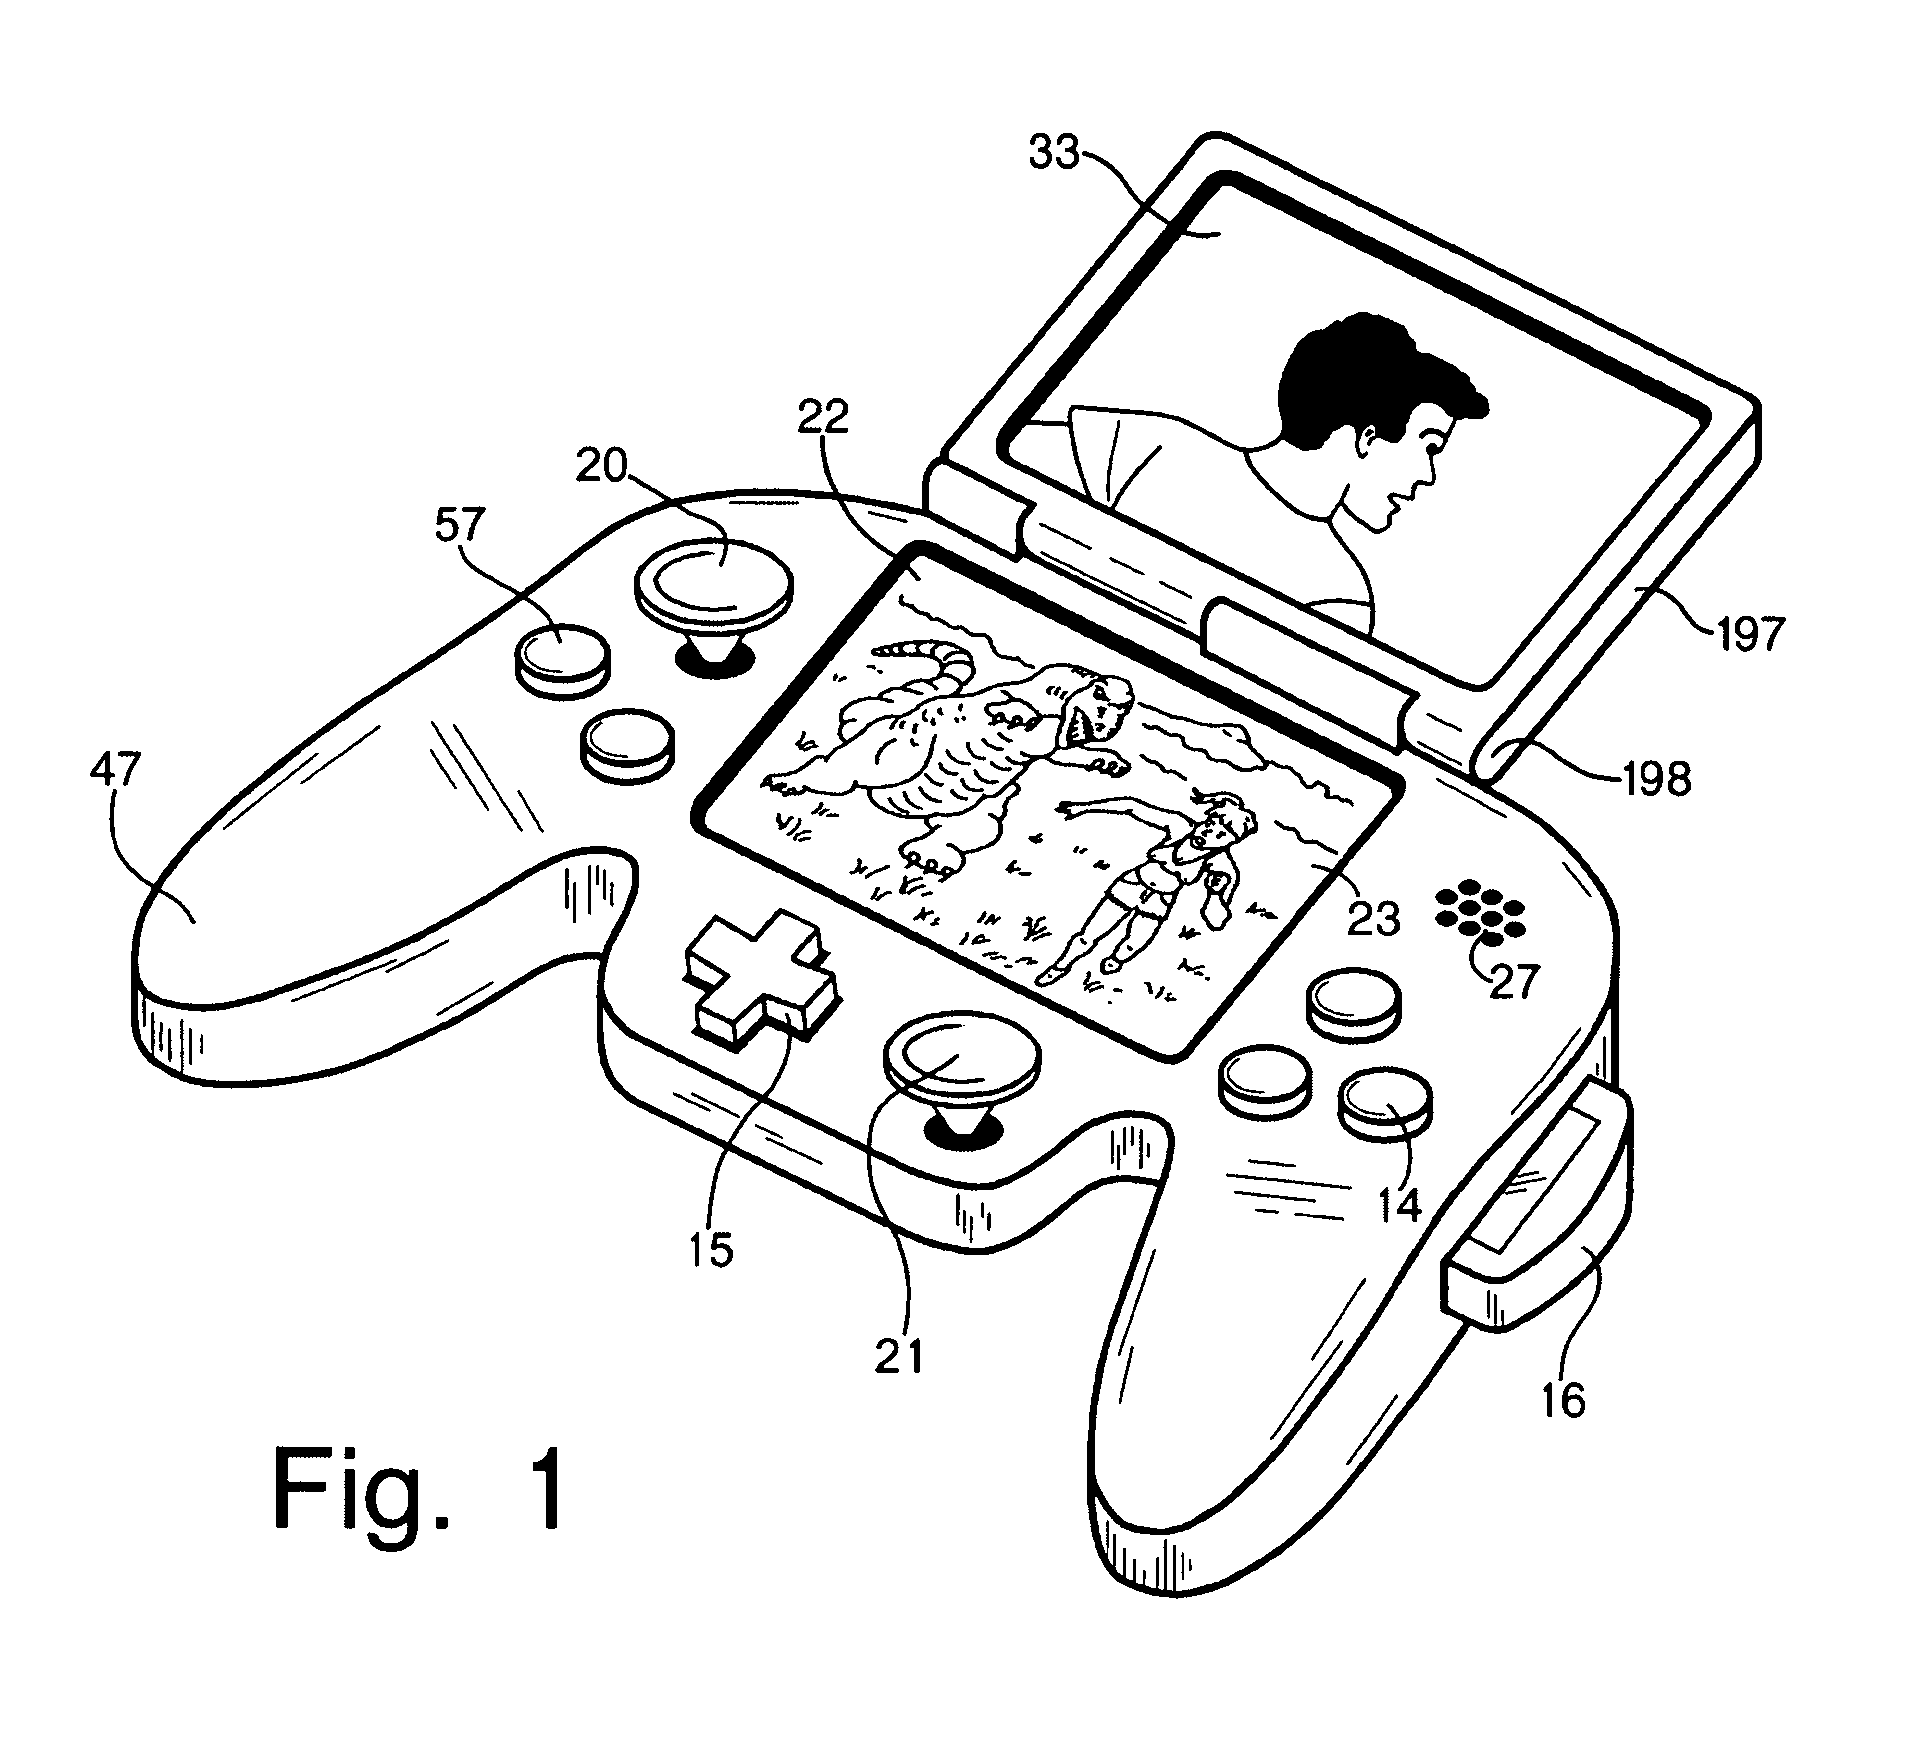 Networked portable and console game systems